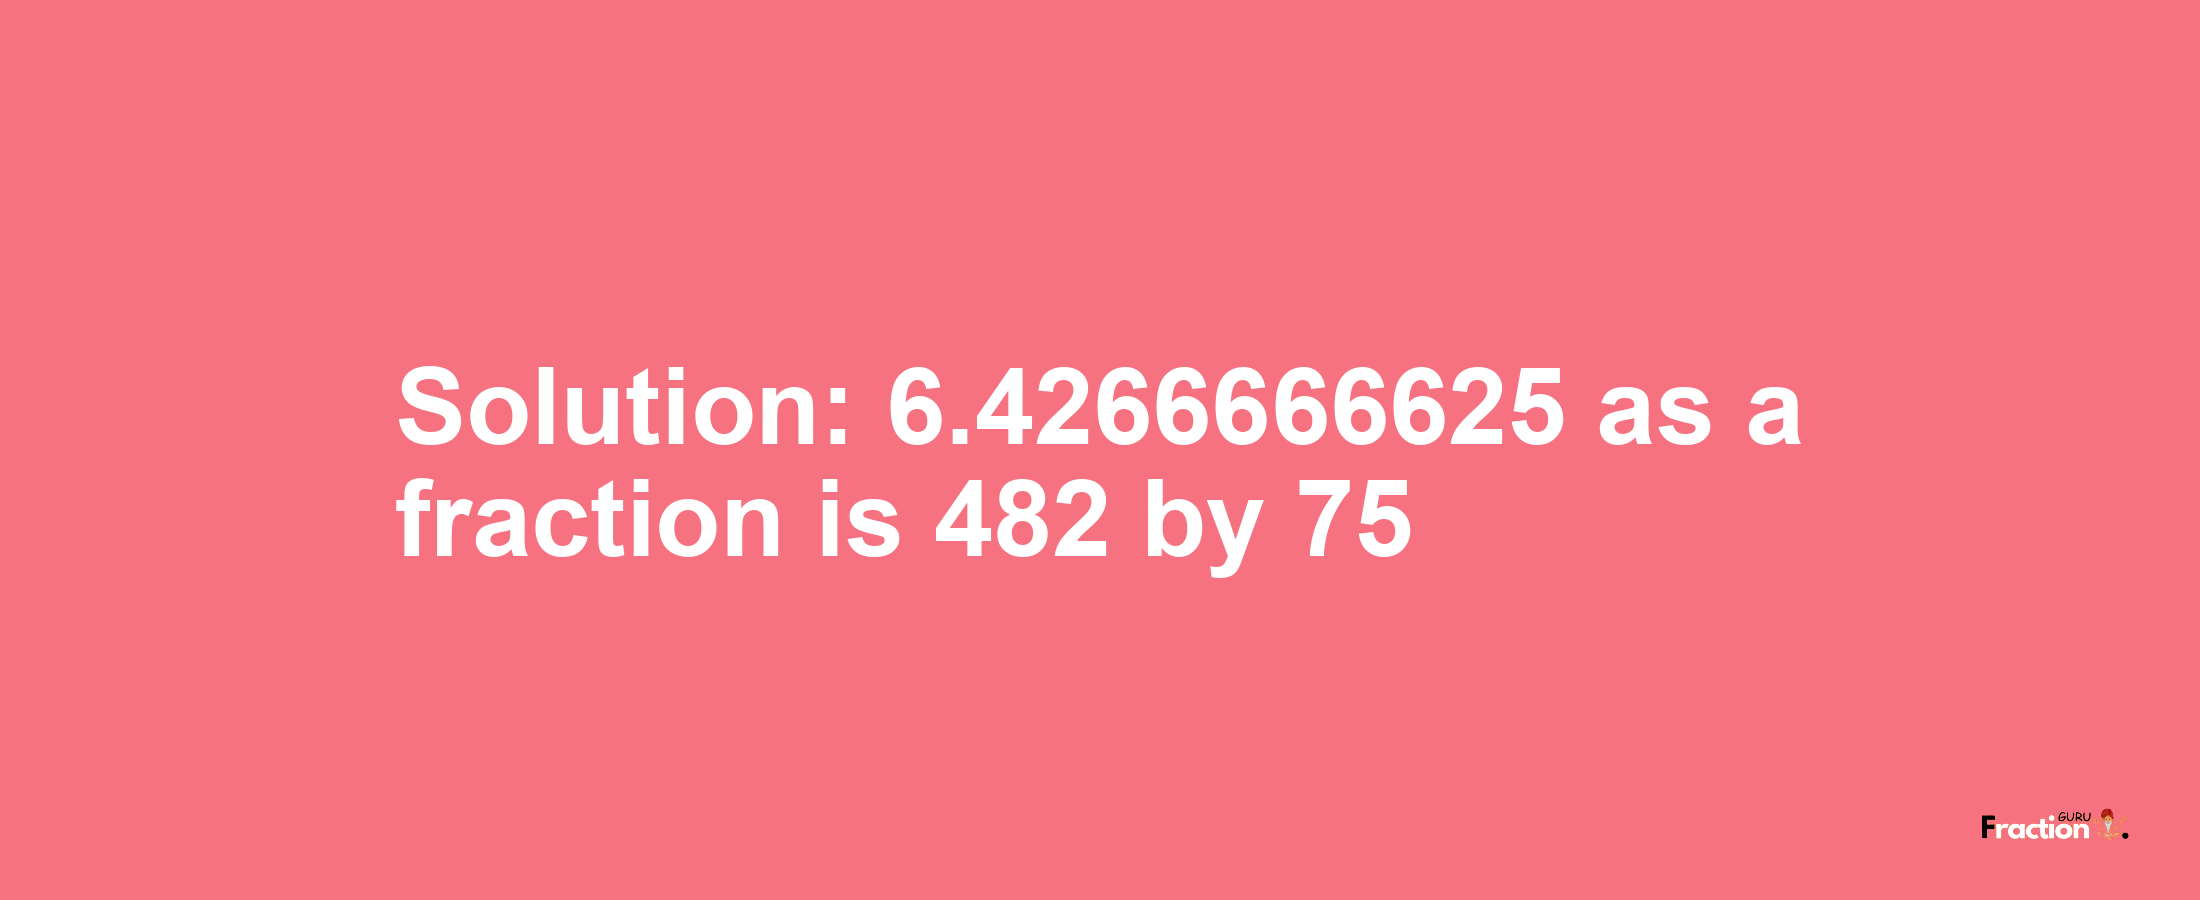 Solution:6.4266666625 as a fraction is 482/75